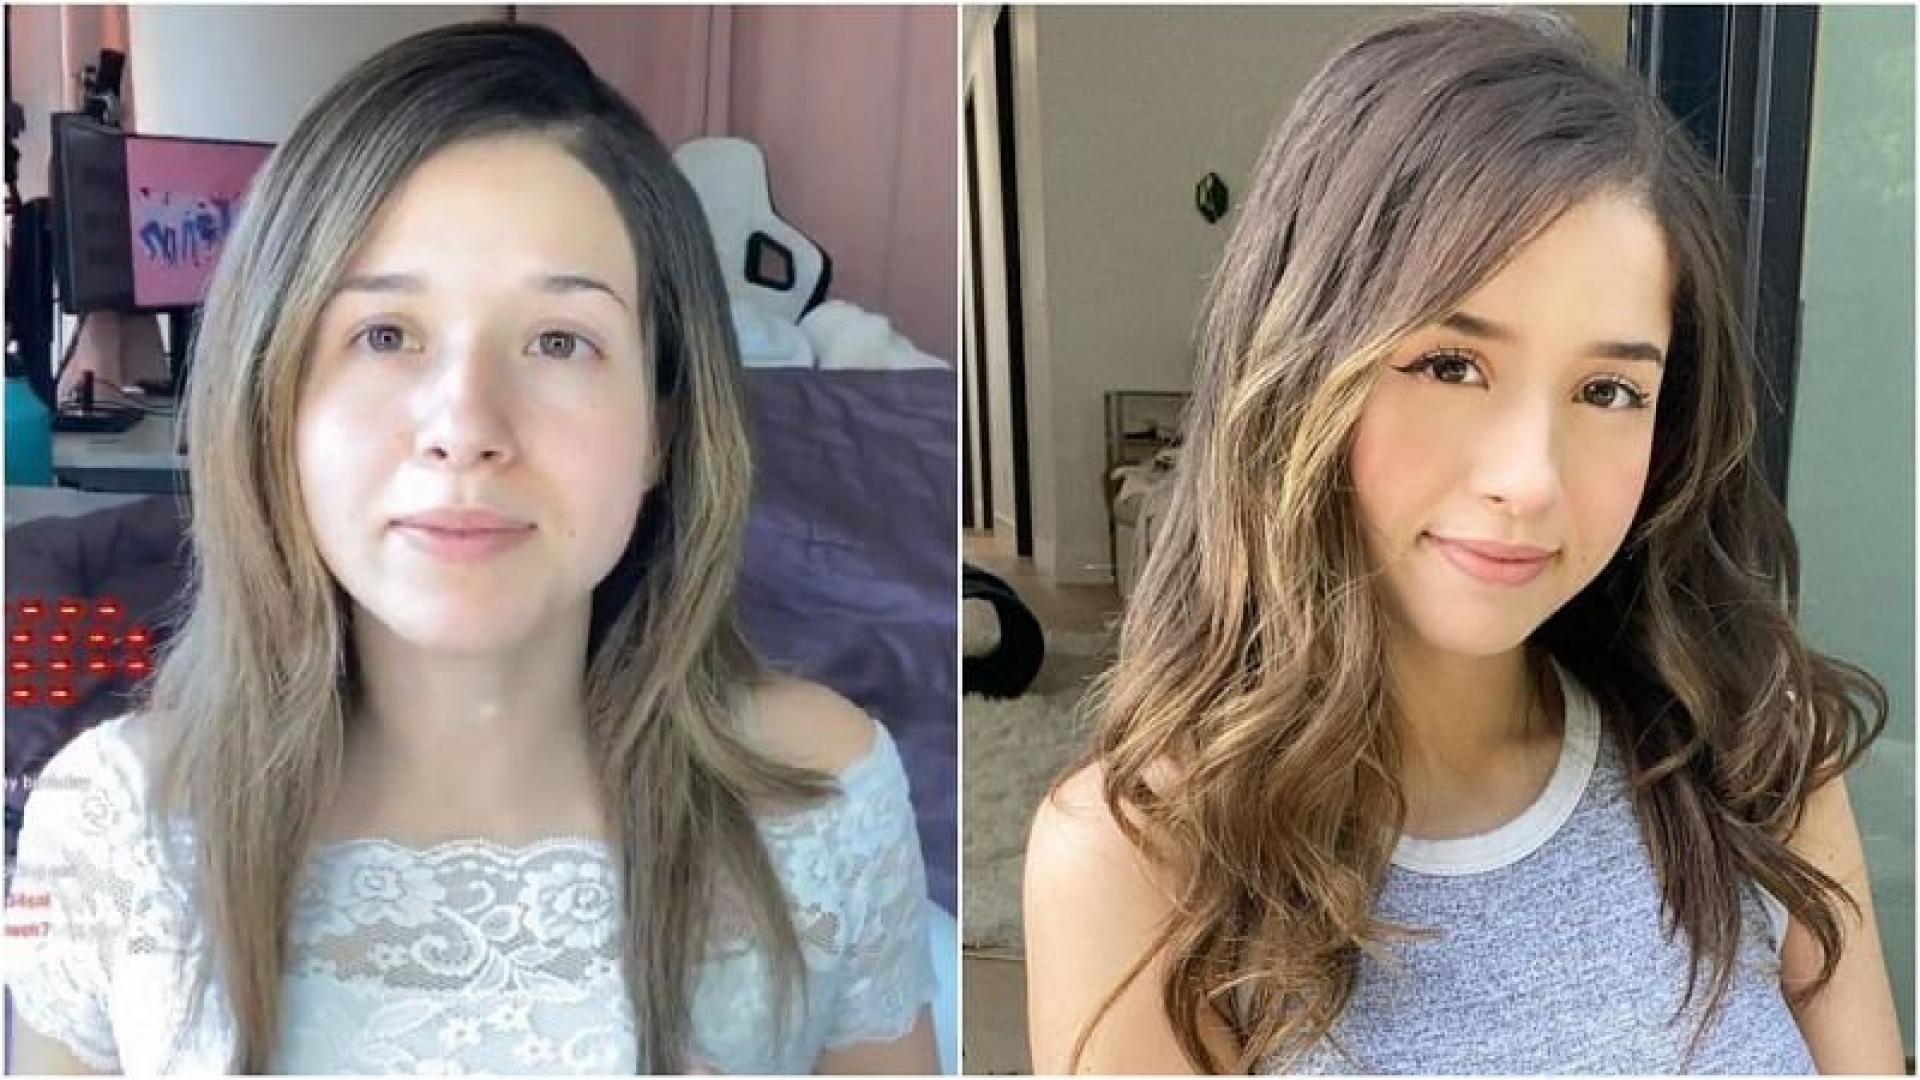 Pokimane with and without makeup